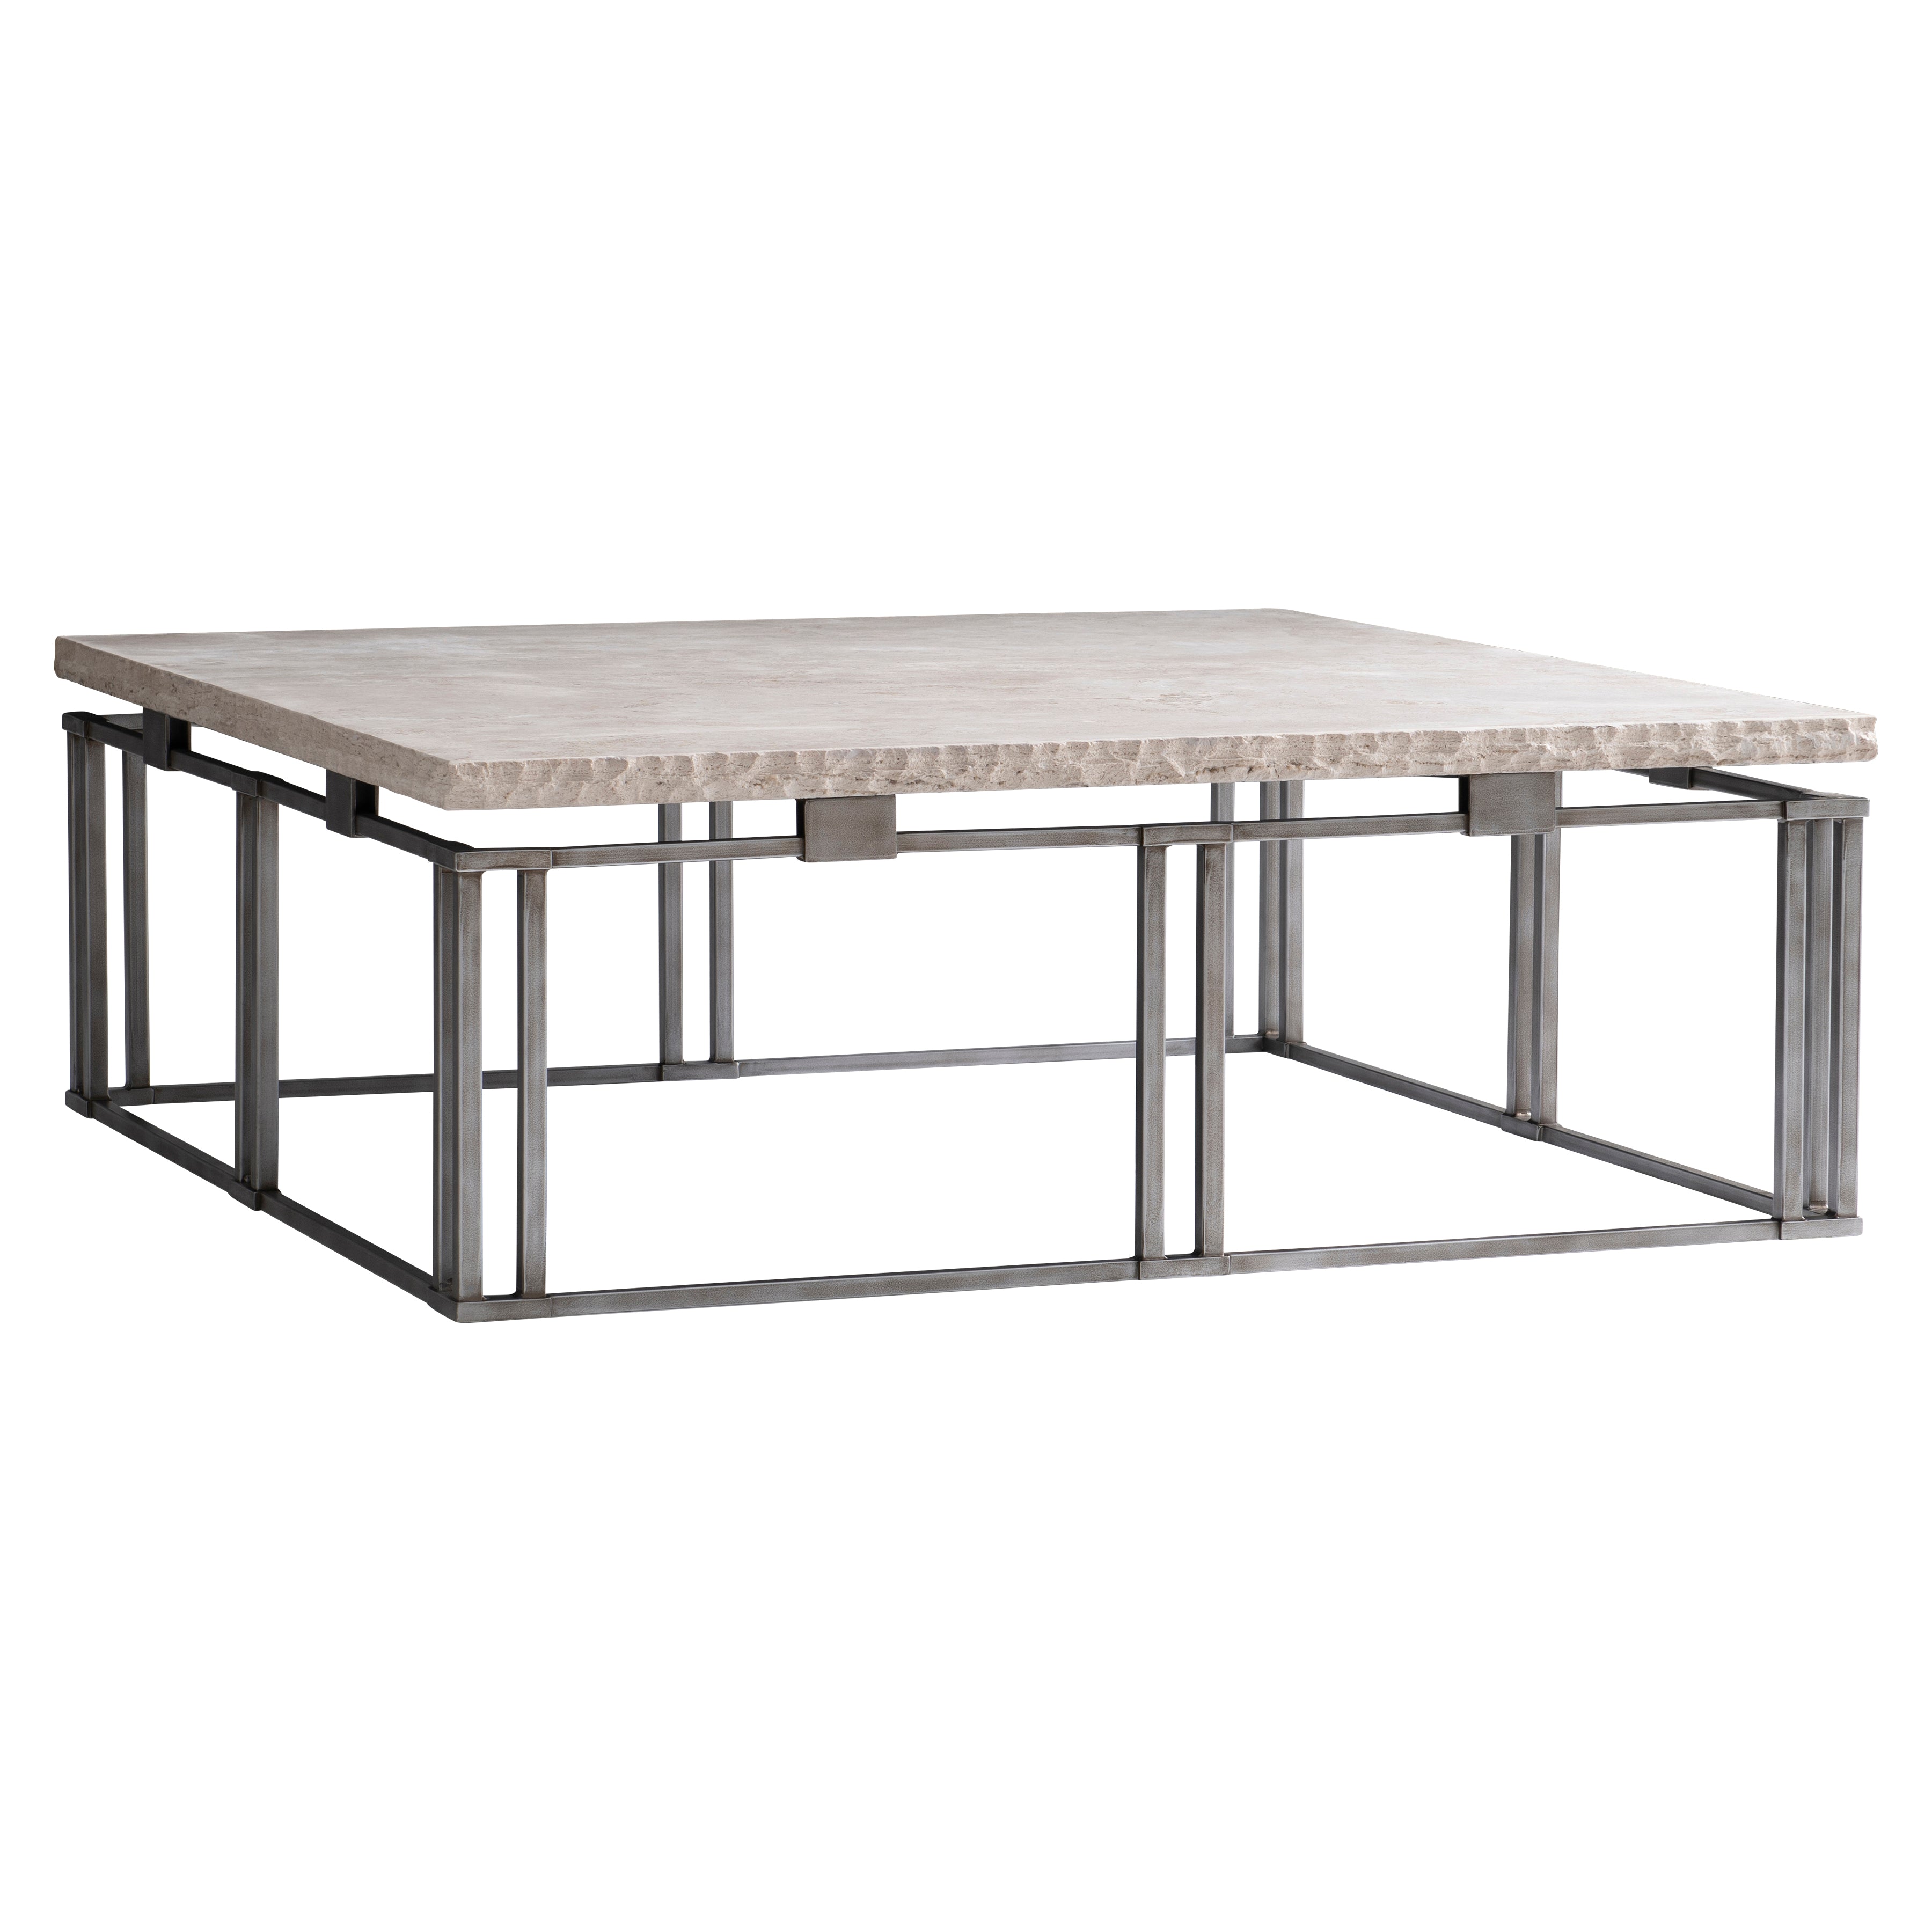 Riverton 48-inch Square Cocktail Table